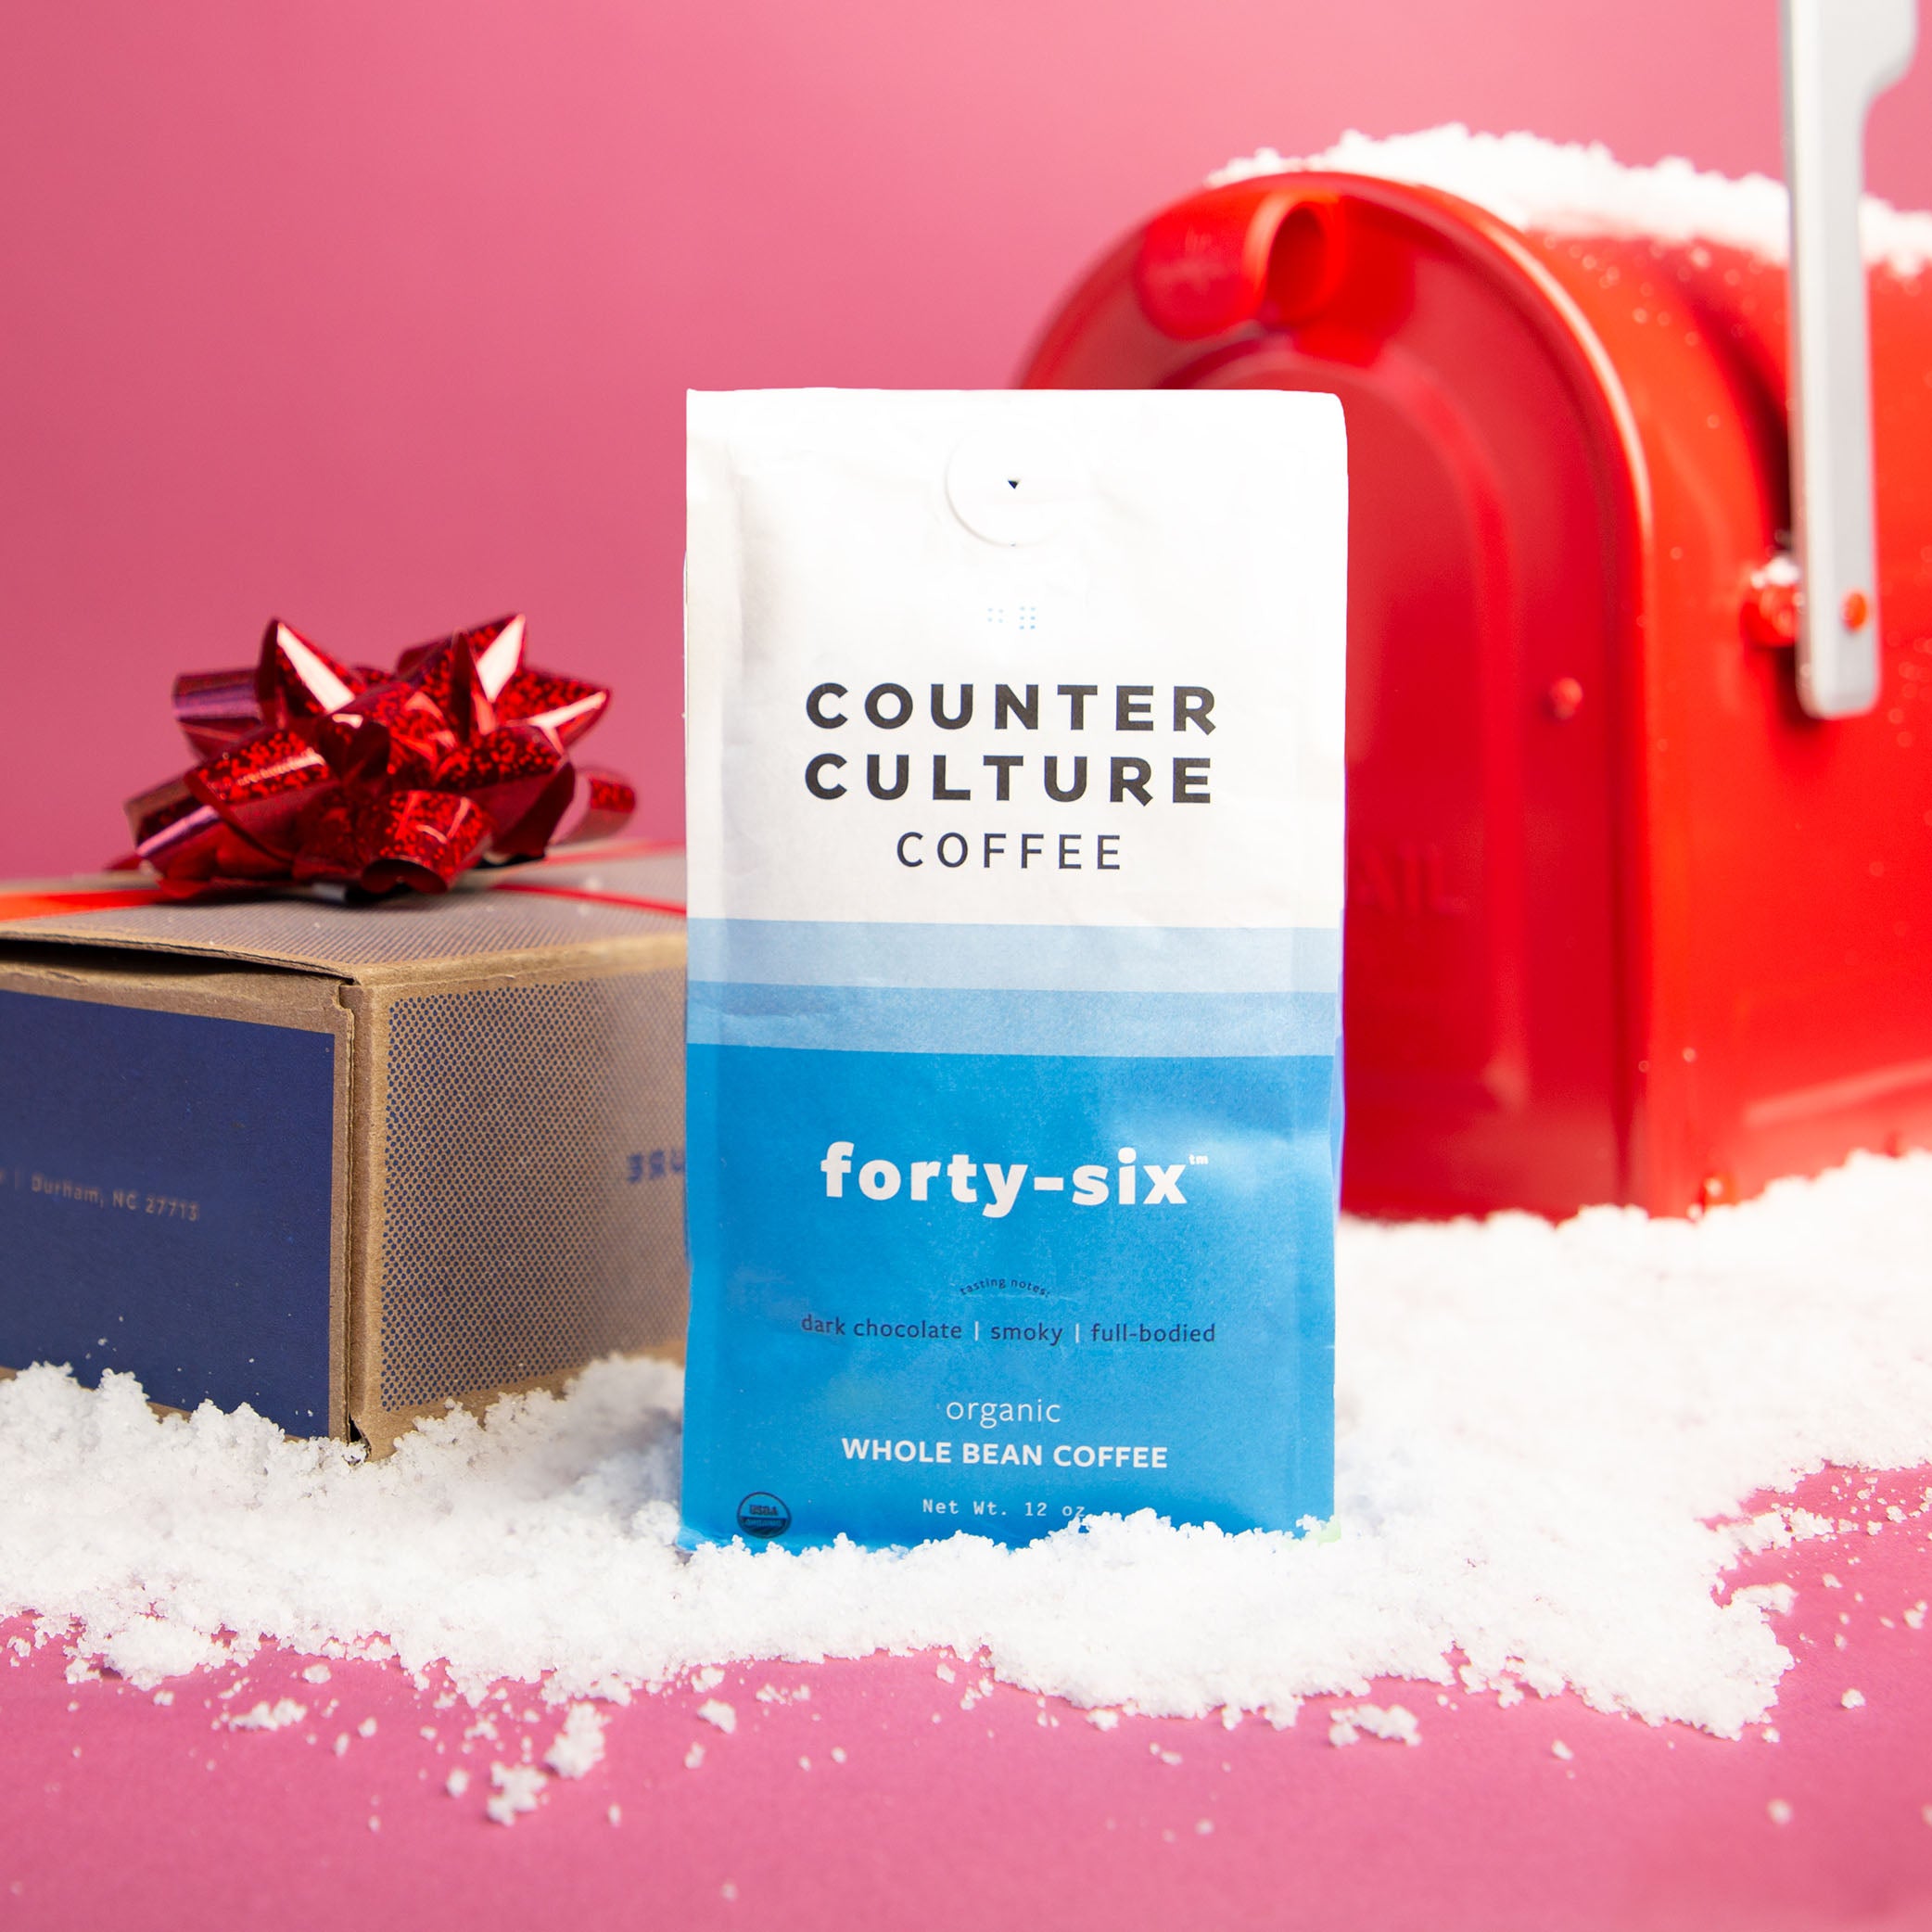 12 Days of Christmas Gifts Day 12: Counter Culture Coffee Subscription